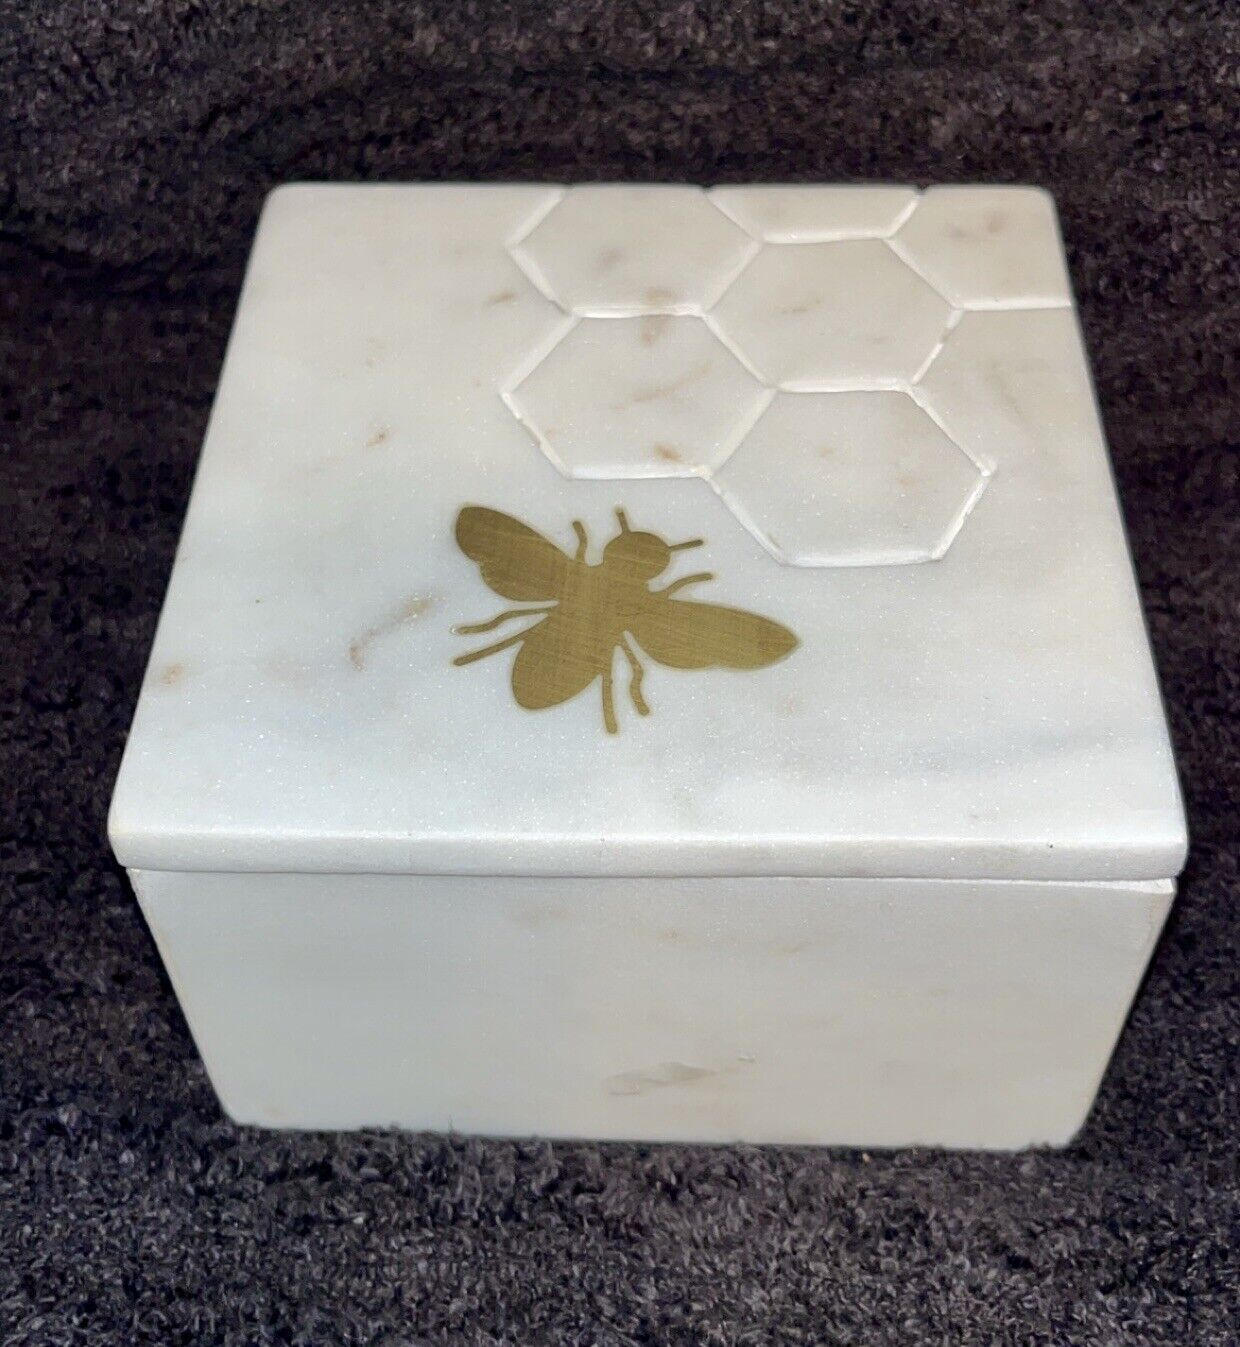 WHITE MARBLE BOX WITH GOLD BEE SQUARE JEWELRY TRINKET BOX DECOR